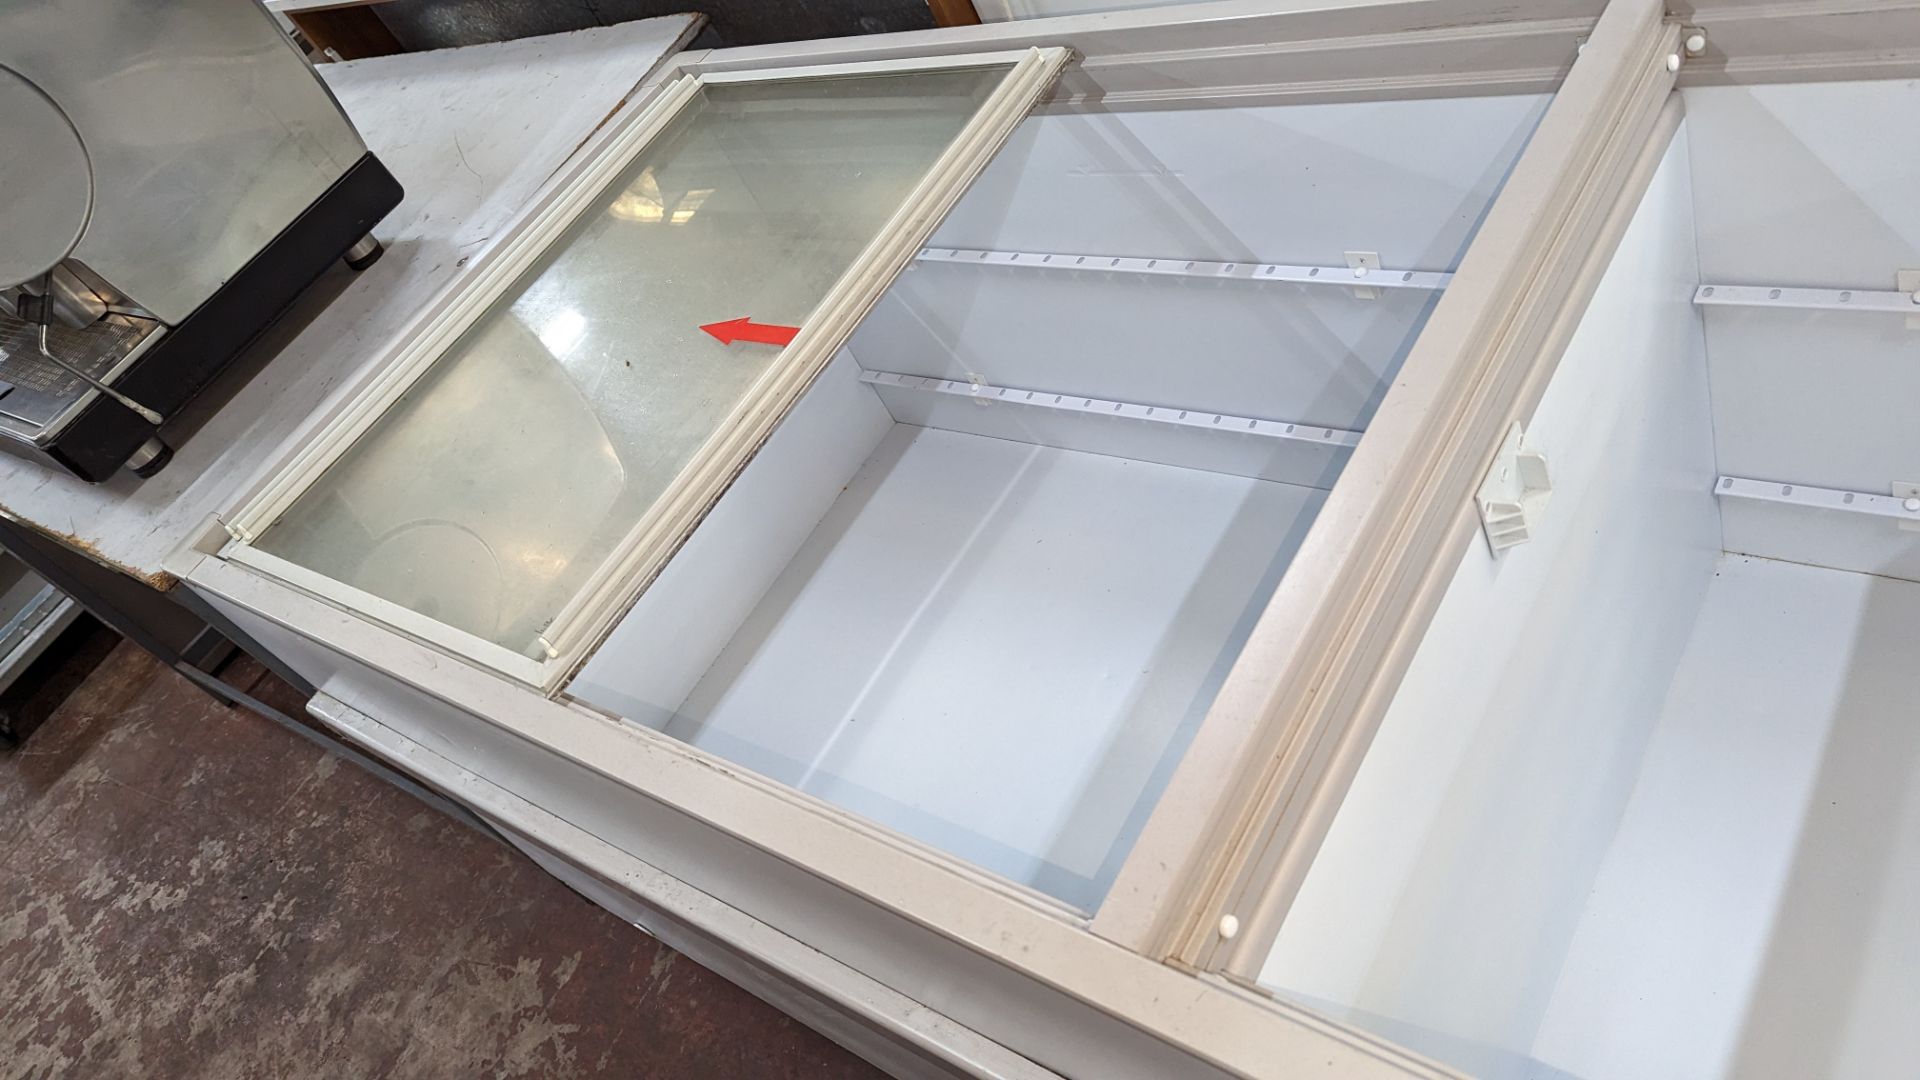 Large clear topped chest freezer measuring approximately 246cm x 91cm - Image 5 of 6